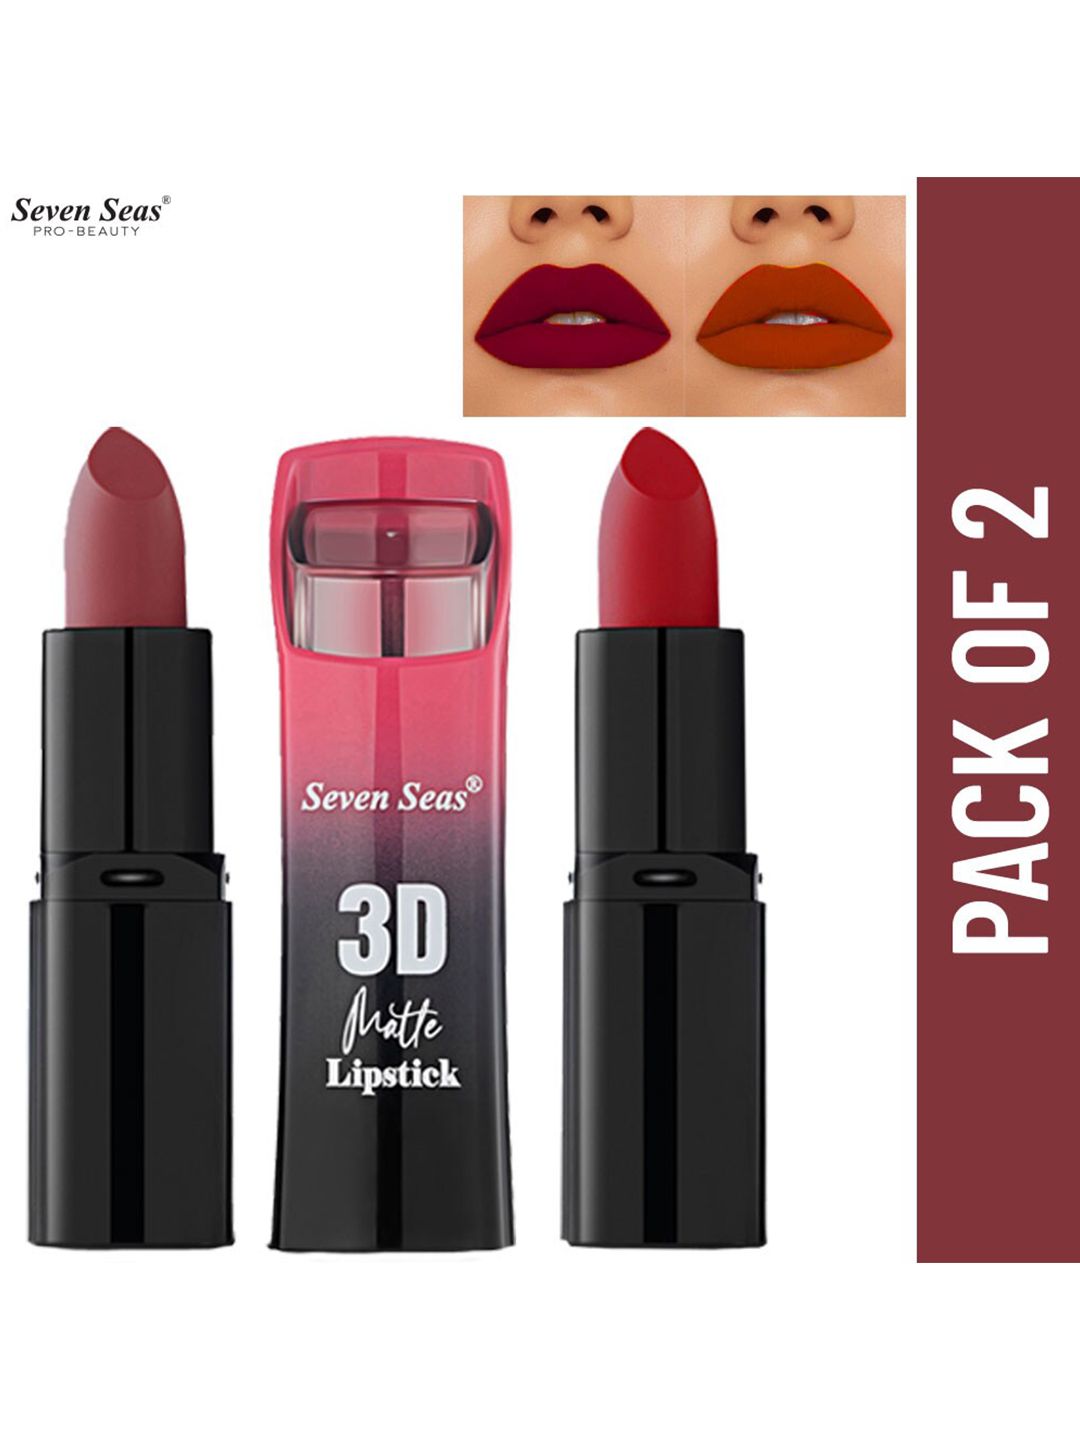 Seven Seas Set of 2 3D Matte Lipstick - Crown of Thorns 311 & Matte Red 312 Price in India